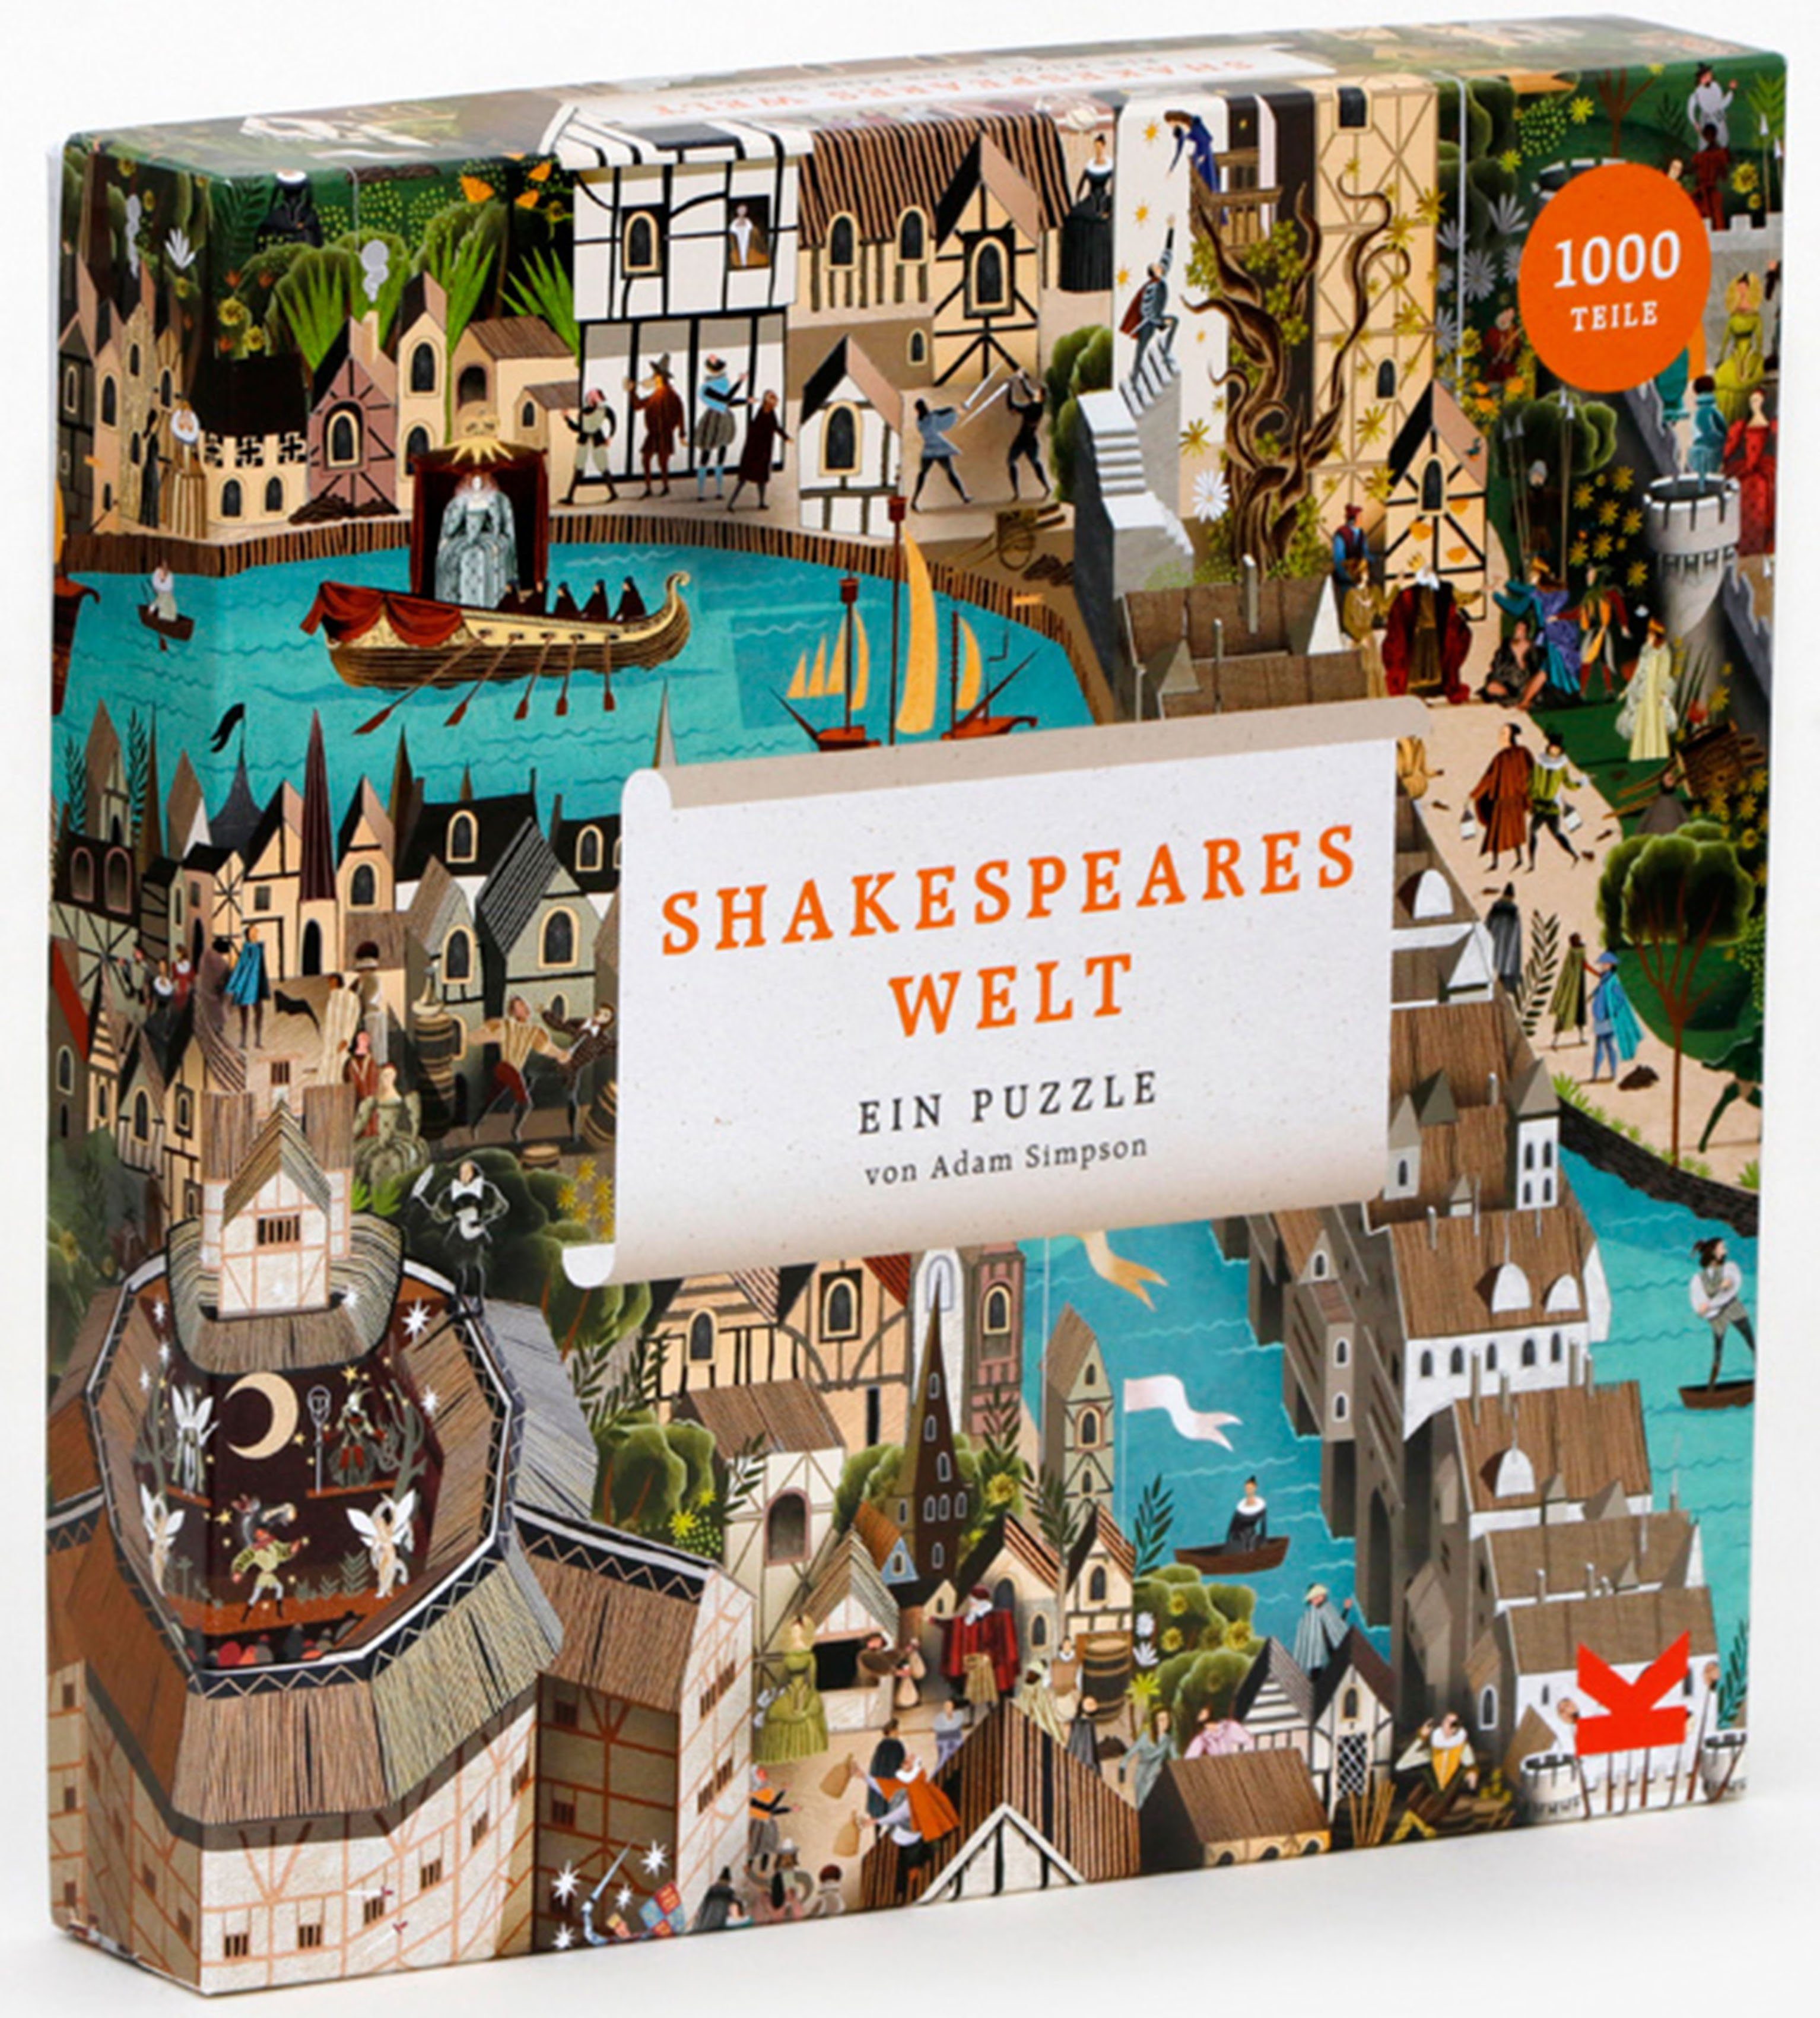 1000 Puzzle Puzzleteile Shakespeares Welt, Laurence King